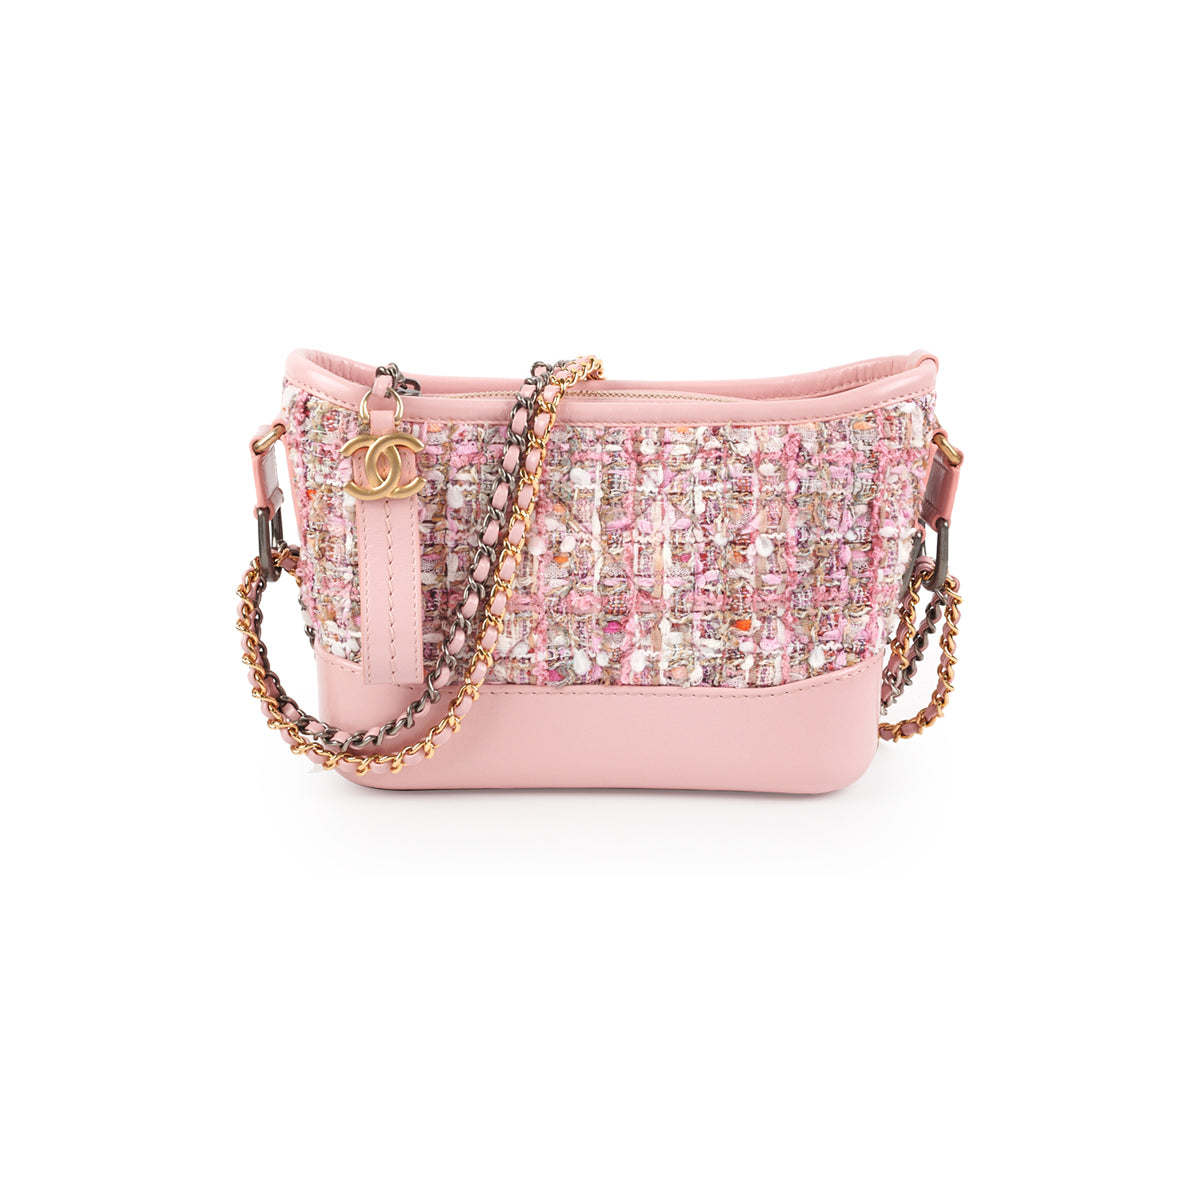 Chanel Small Gabrielle Tweed Pink - THE PURSE AFFAIR